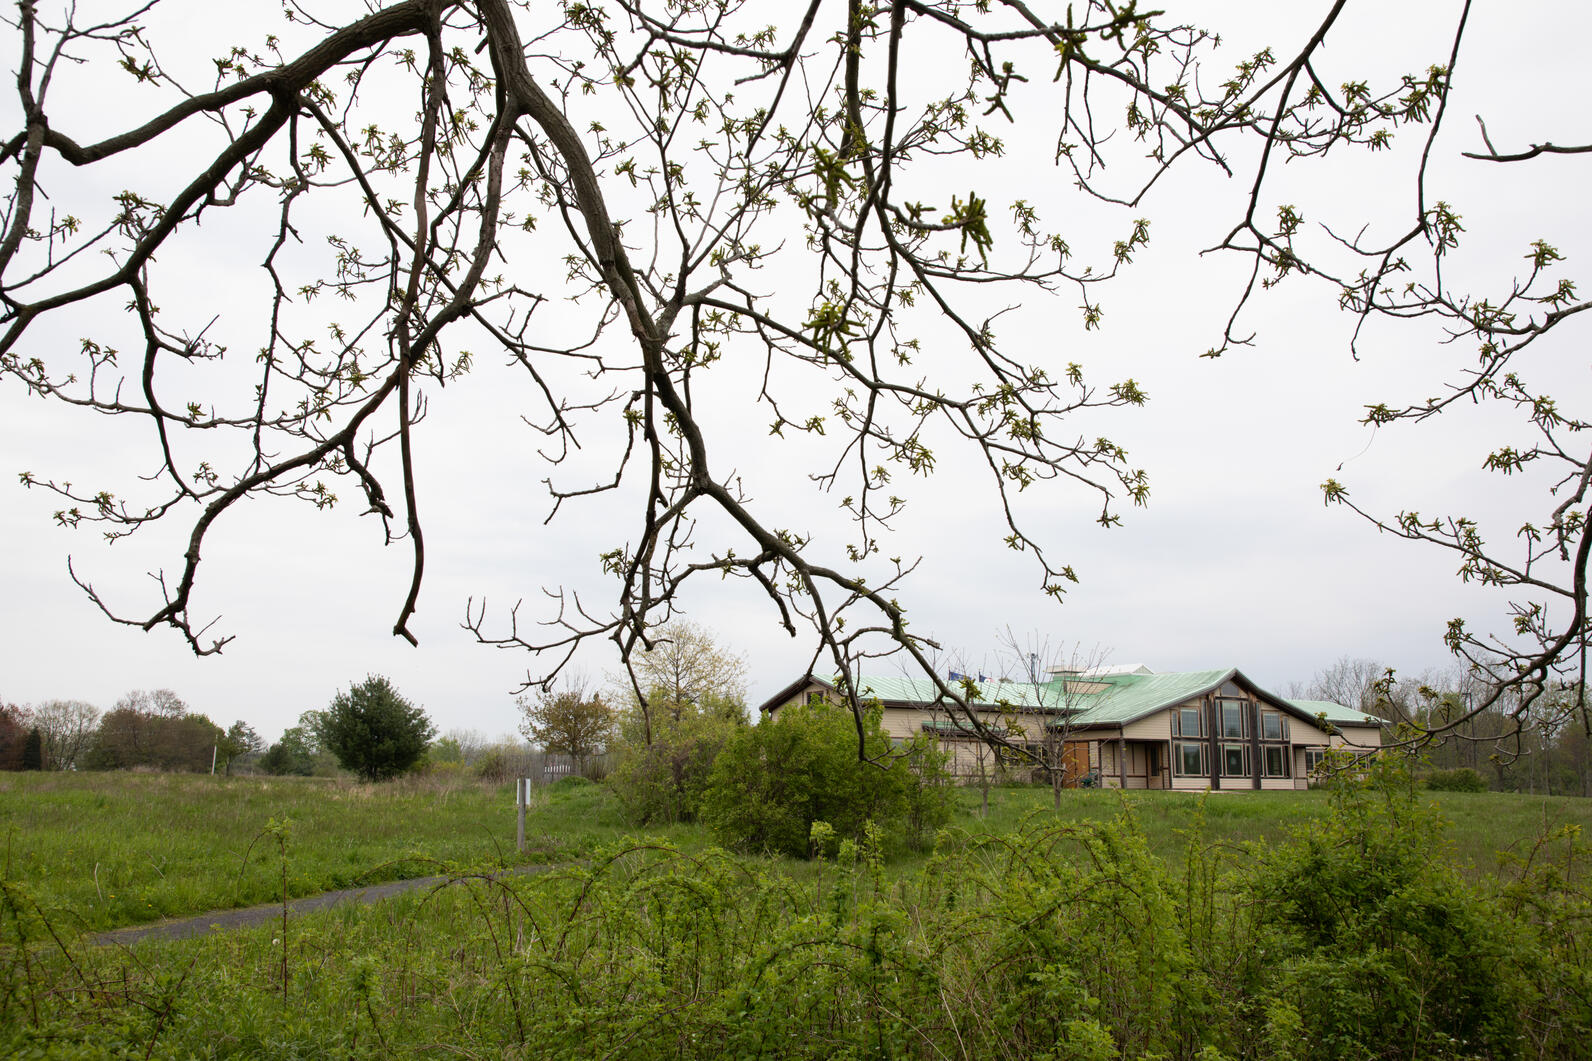 The Montezuma Audubon Center building. A tree with flower buds covers a portion of the foreground.